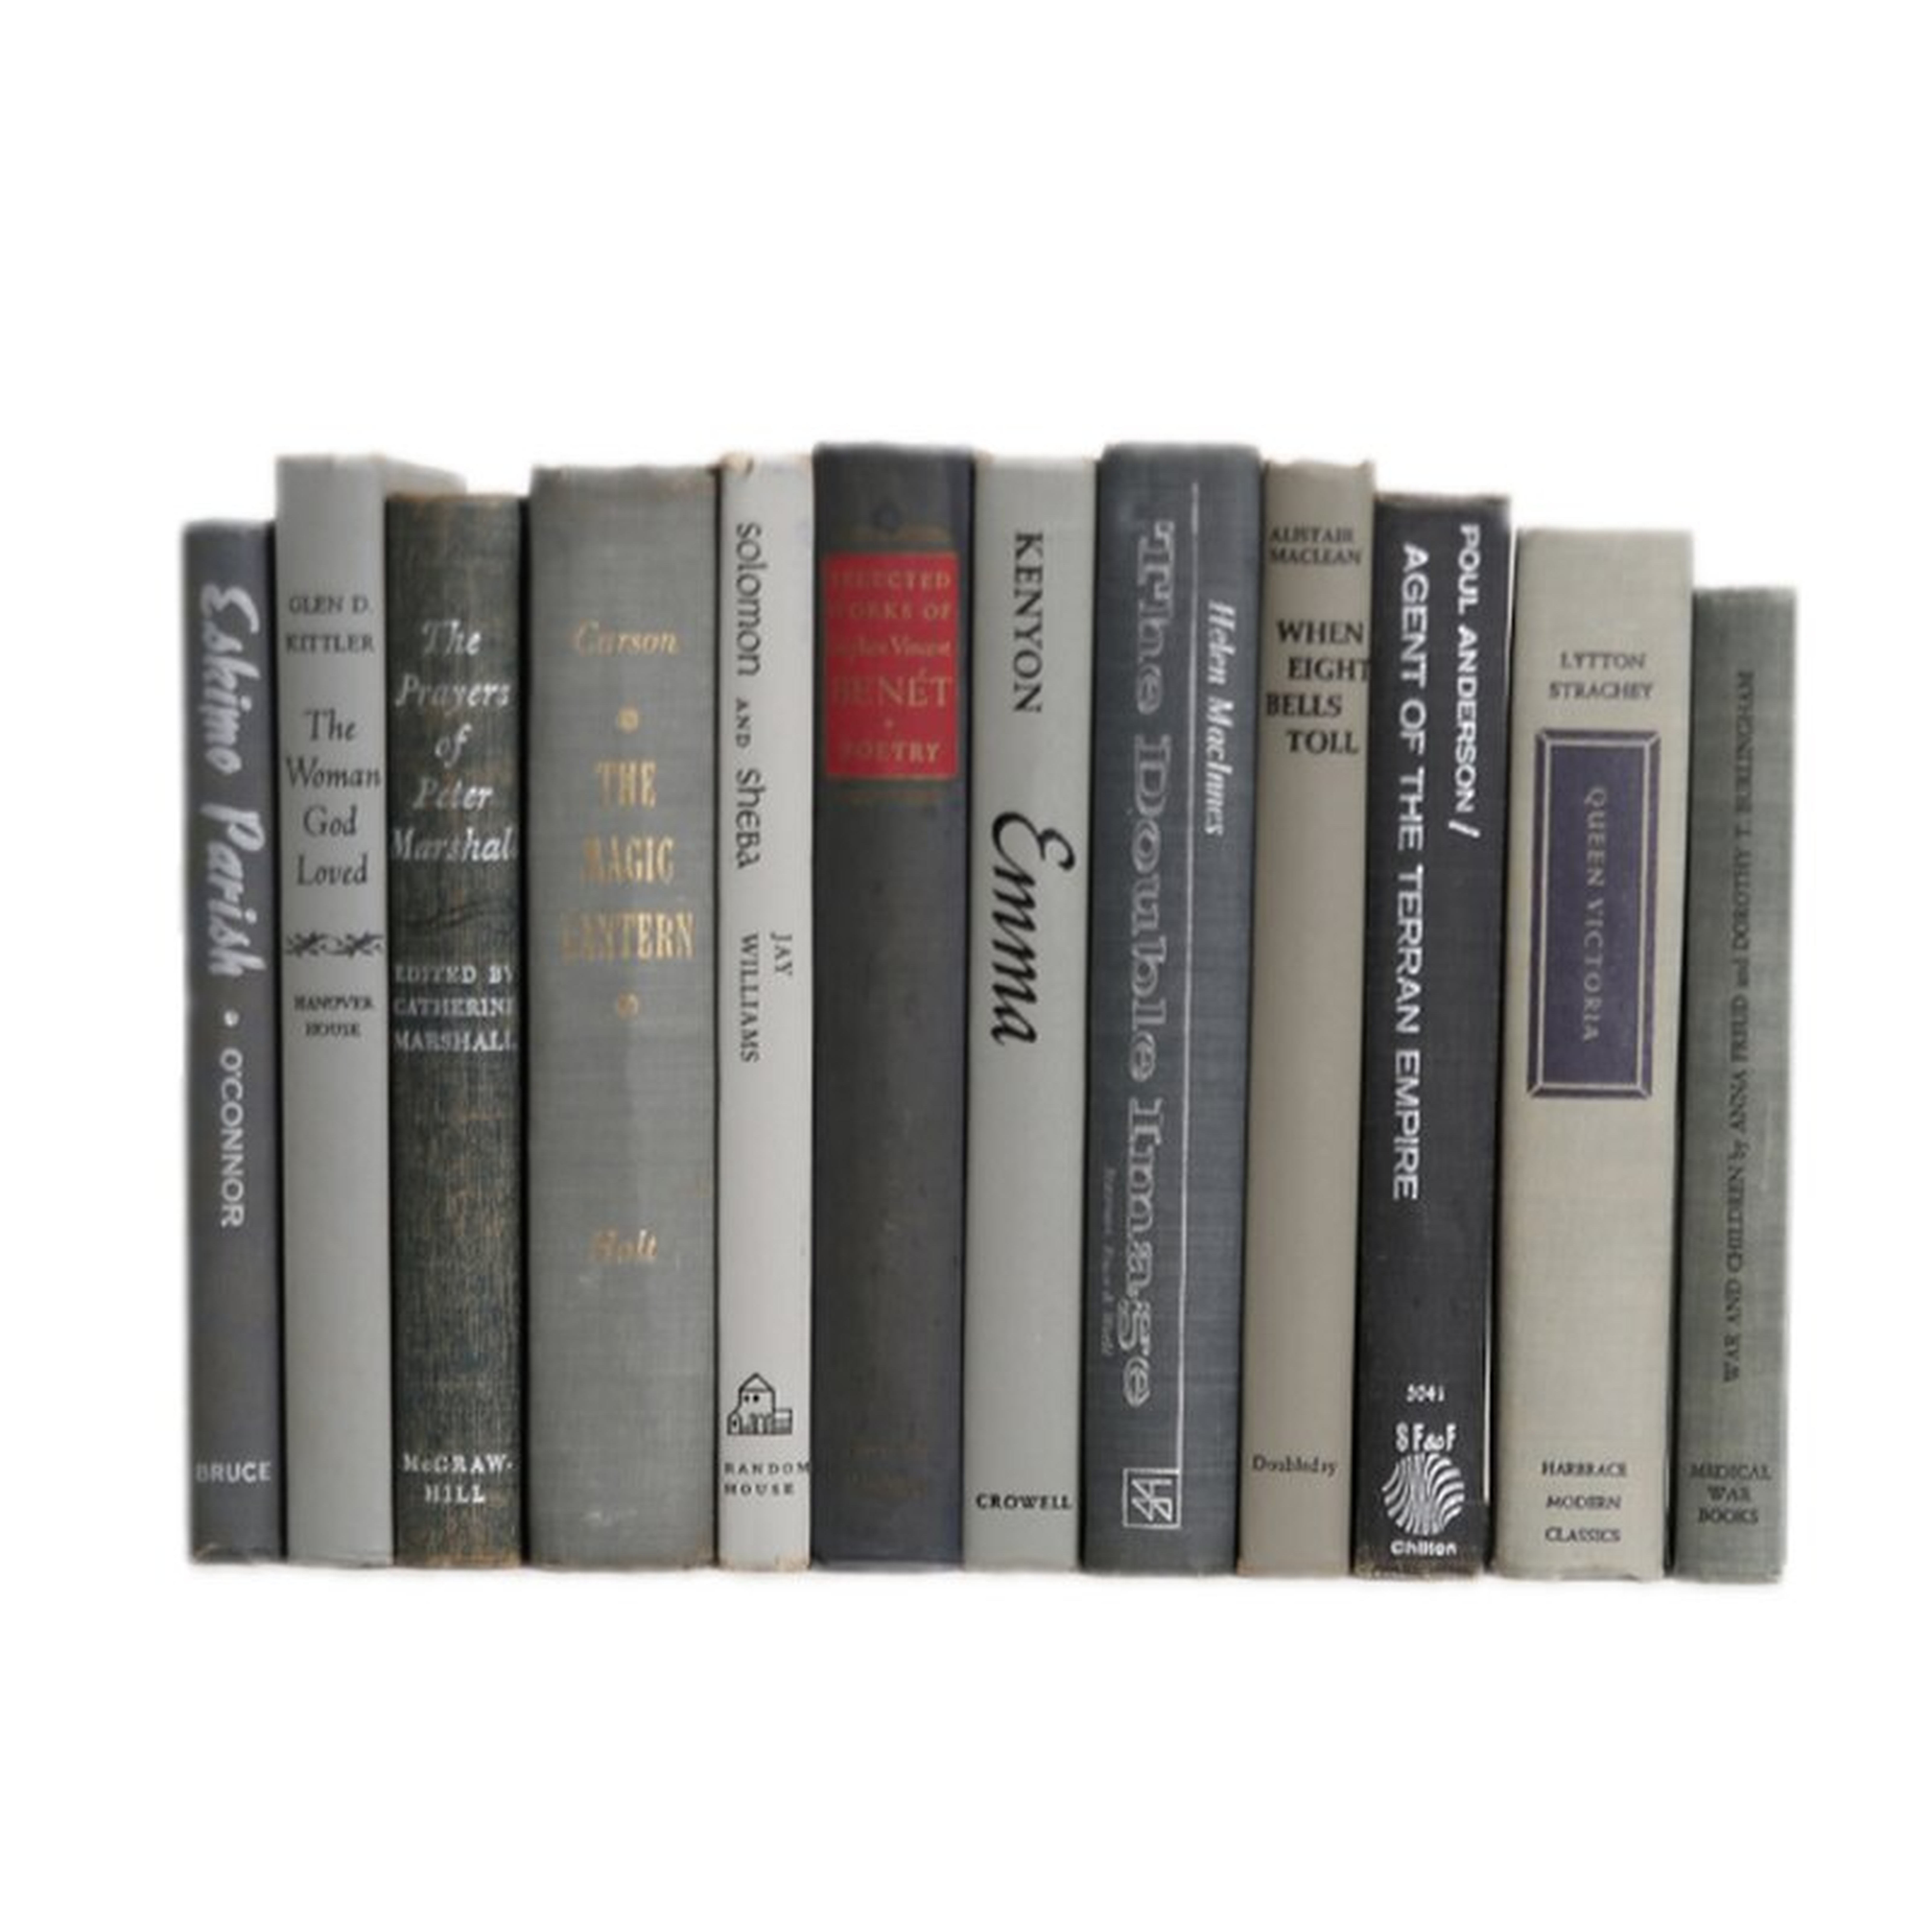 Booth & Williams Authentic Decorative Books - By Color Mid-century Granite ColorPak (1 Linear Foot, 10-12 Books) - Perigold